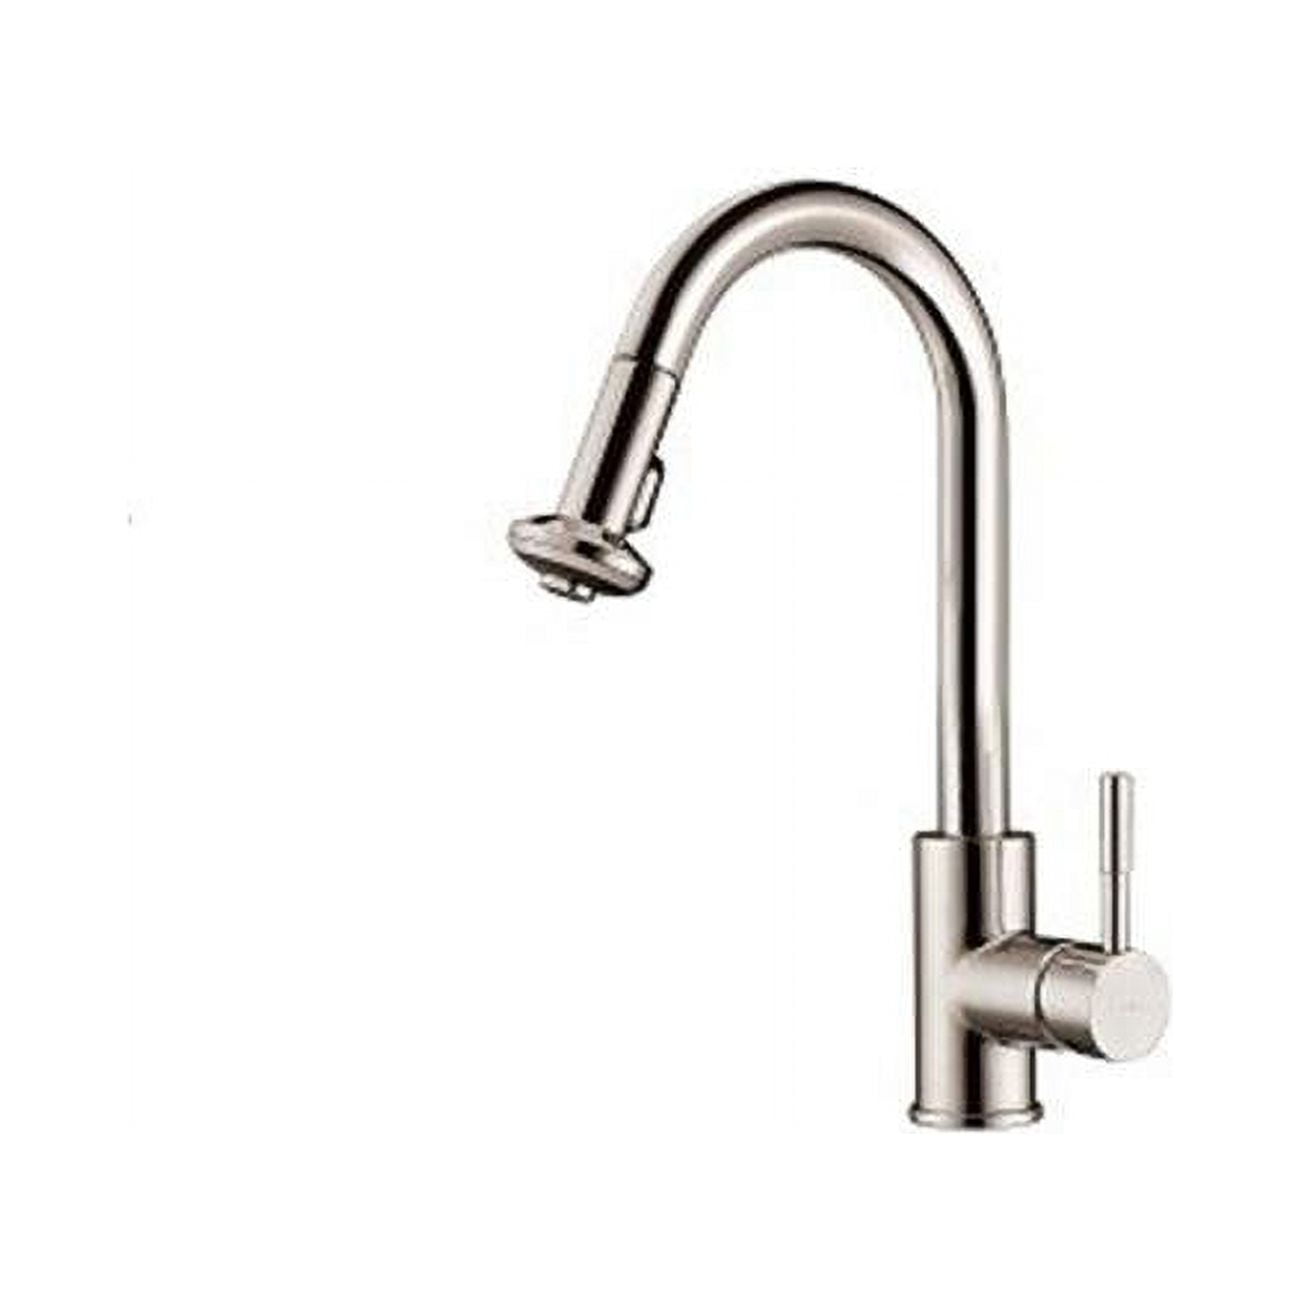 Ab50 3316bn Single-lever Pull-down Spray Sink Mixer, Brushed Nickel